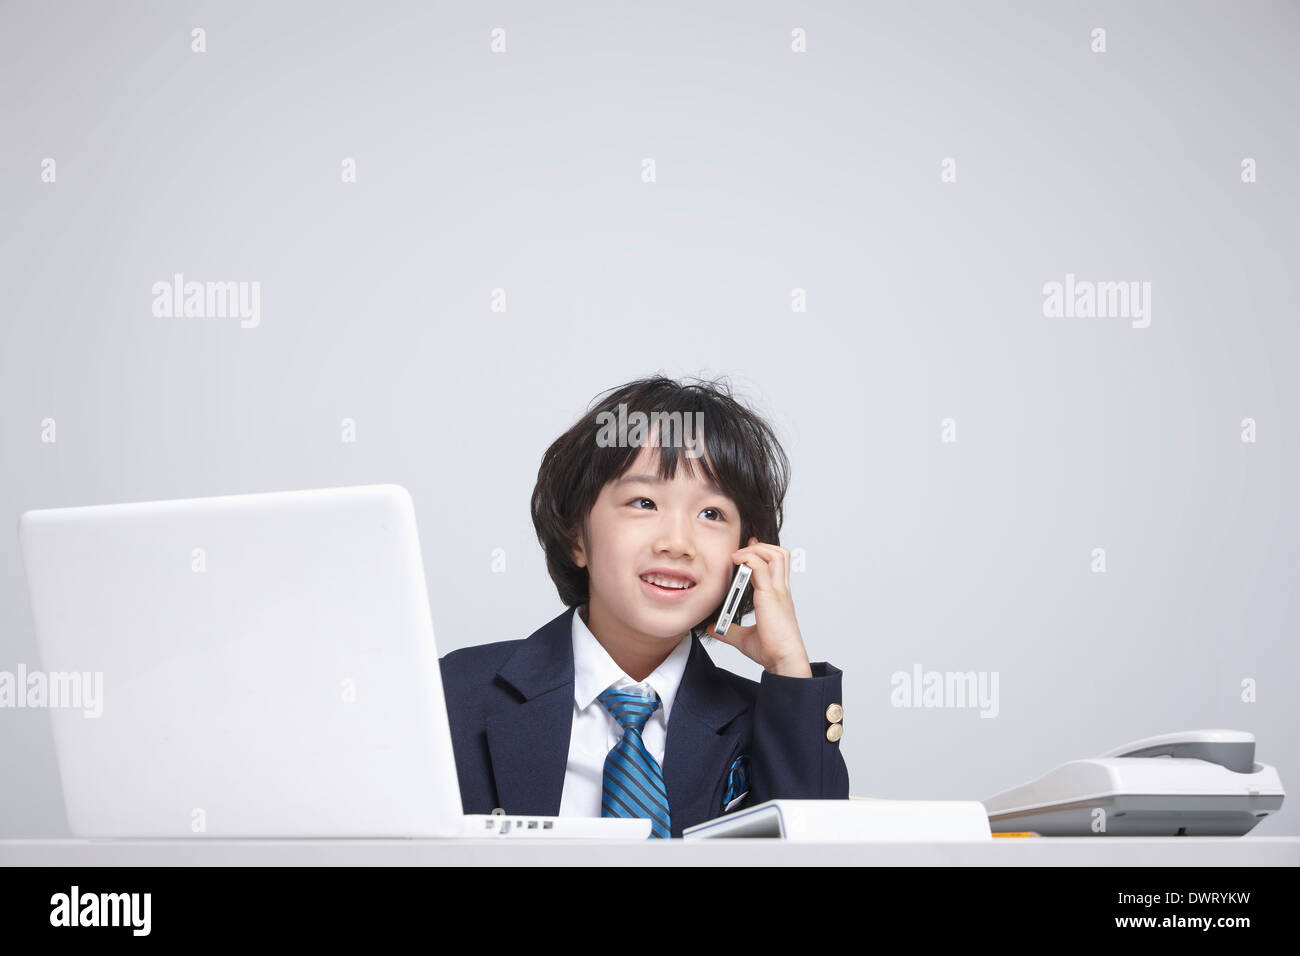 a kid wearing a business suit making a call Stock Photo